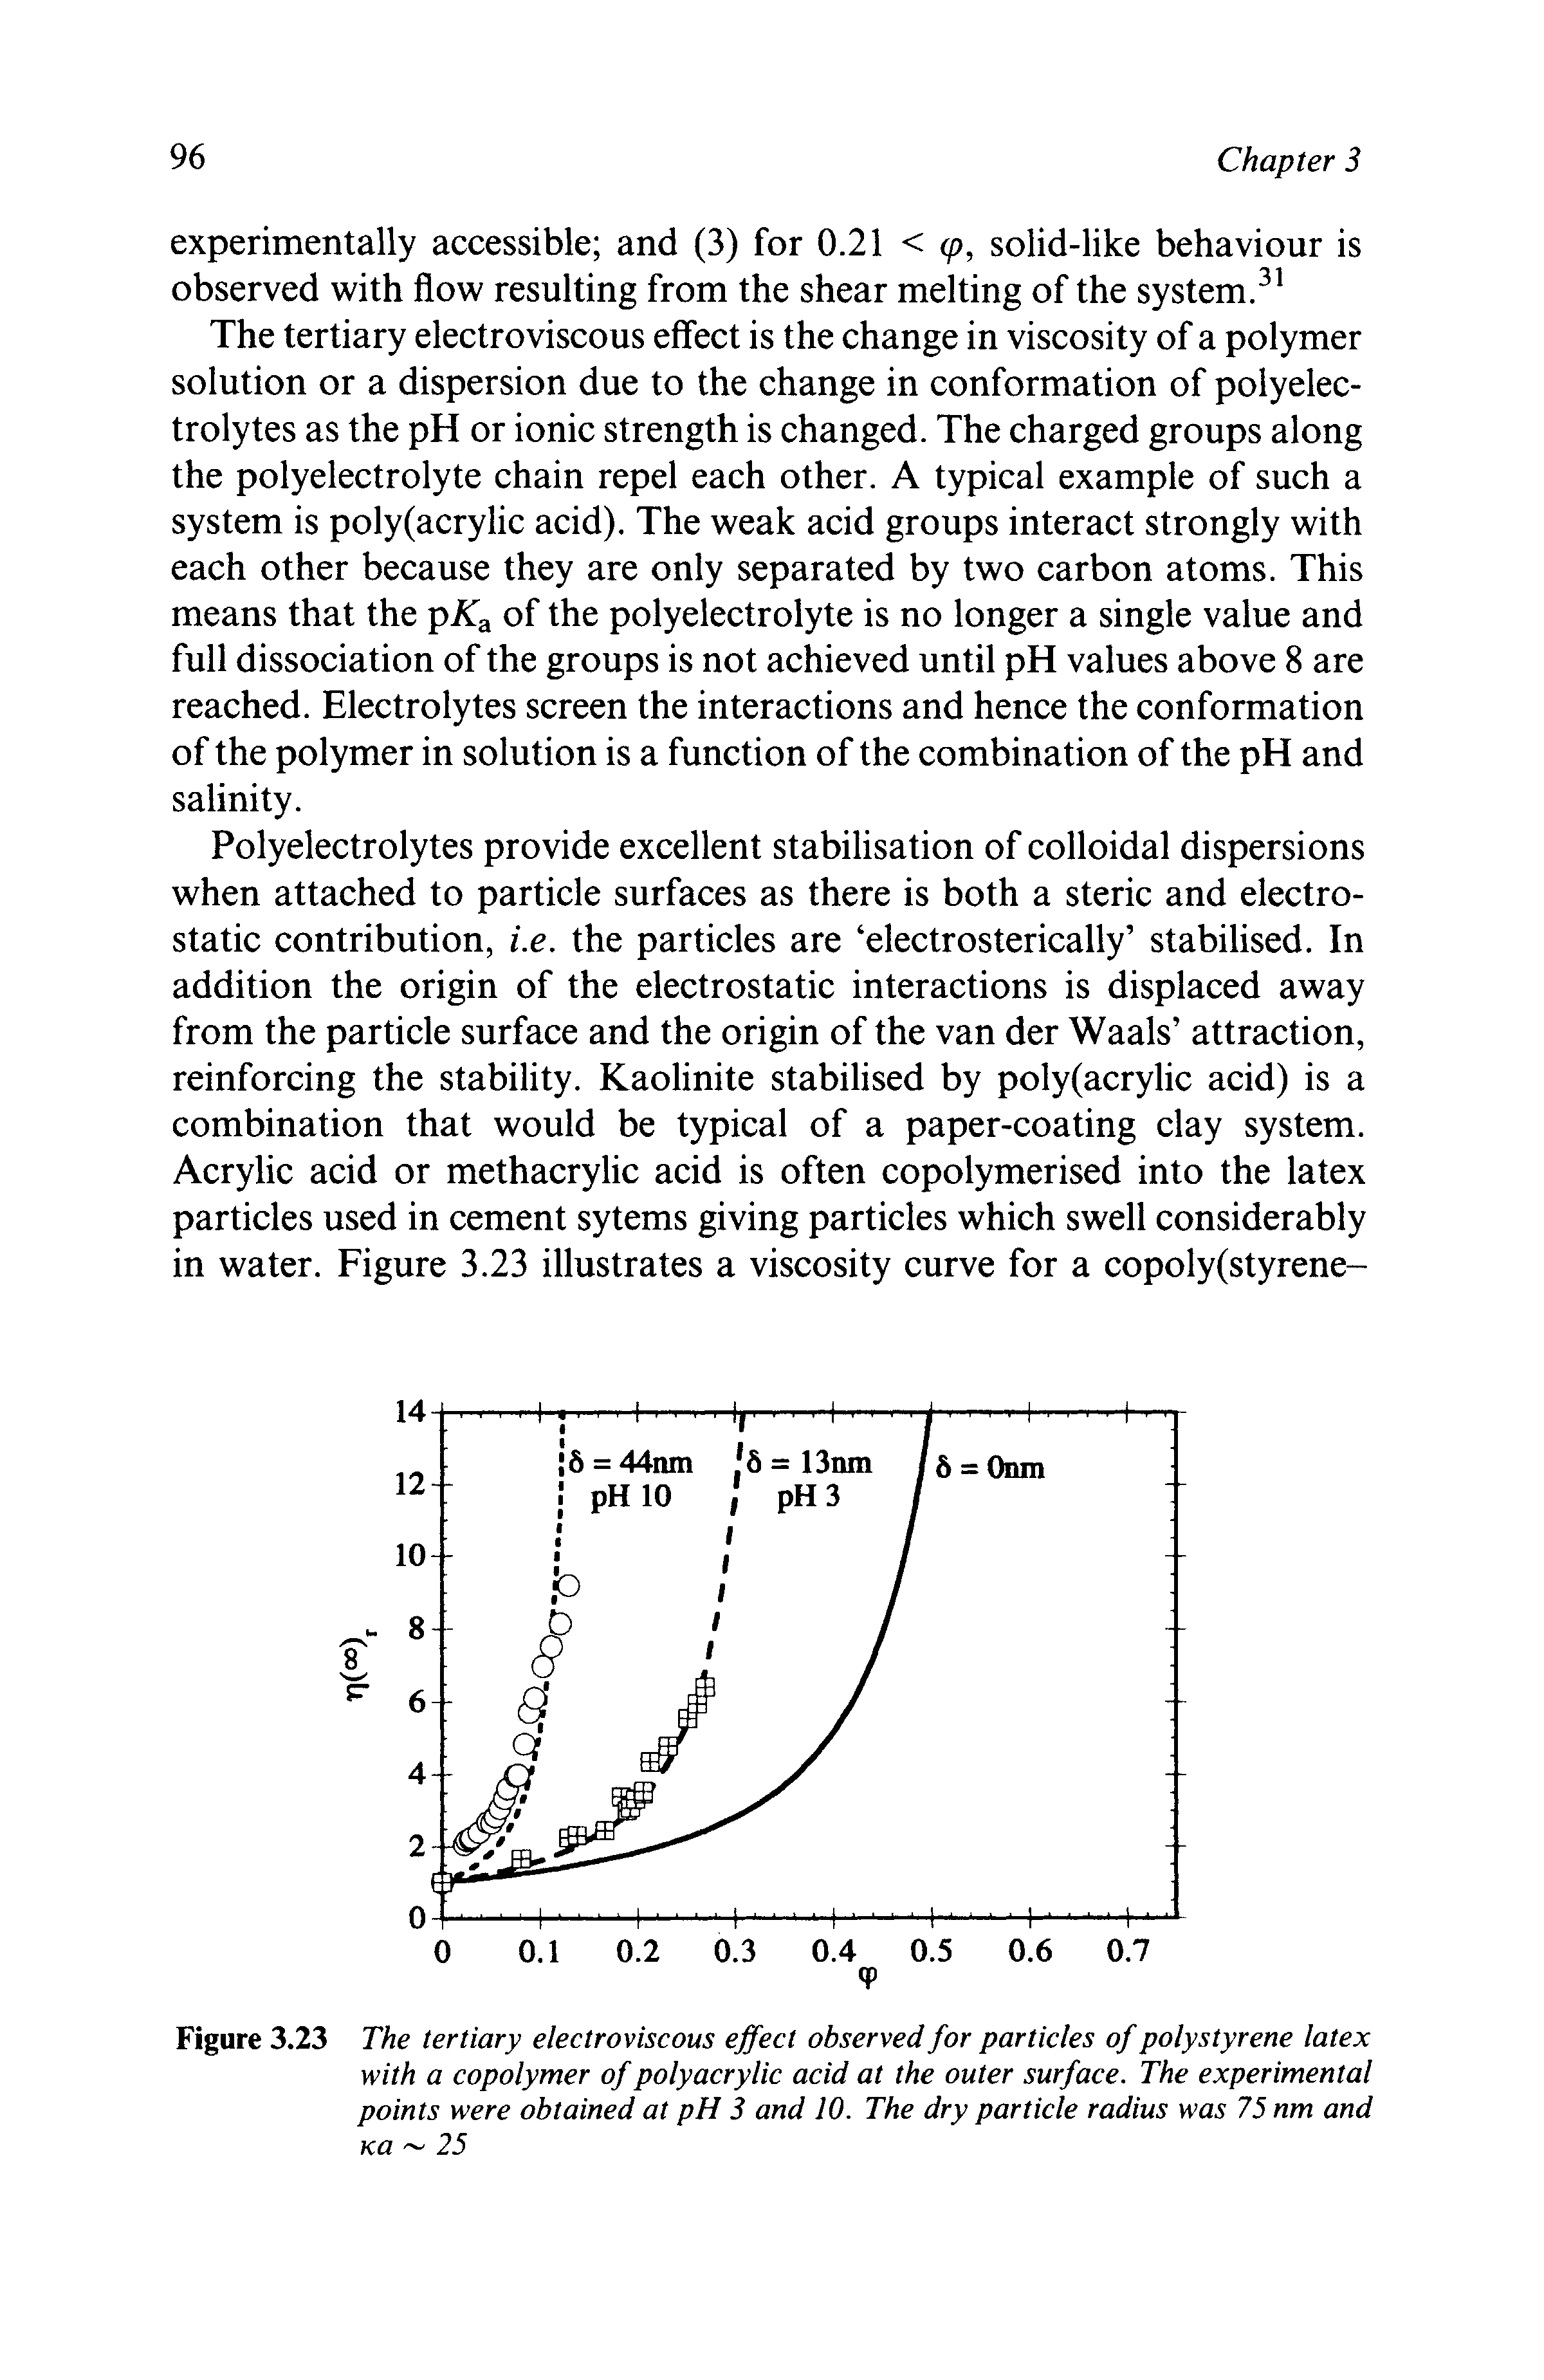 Figure 3.23 The tertiary electroviscous effect observed for particles of polystyrene latex with a copolymer of polyacrylic acid at the outer surface. The experimental points were obtained at pH 3 and 10. The dry particle radius was 75 nm and Ka 25...